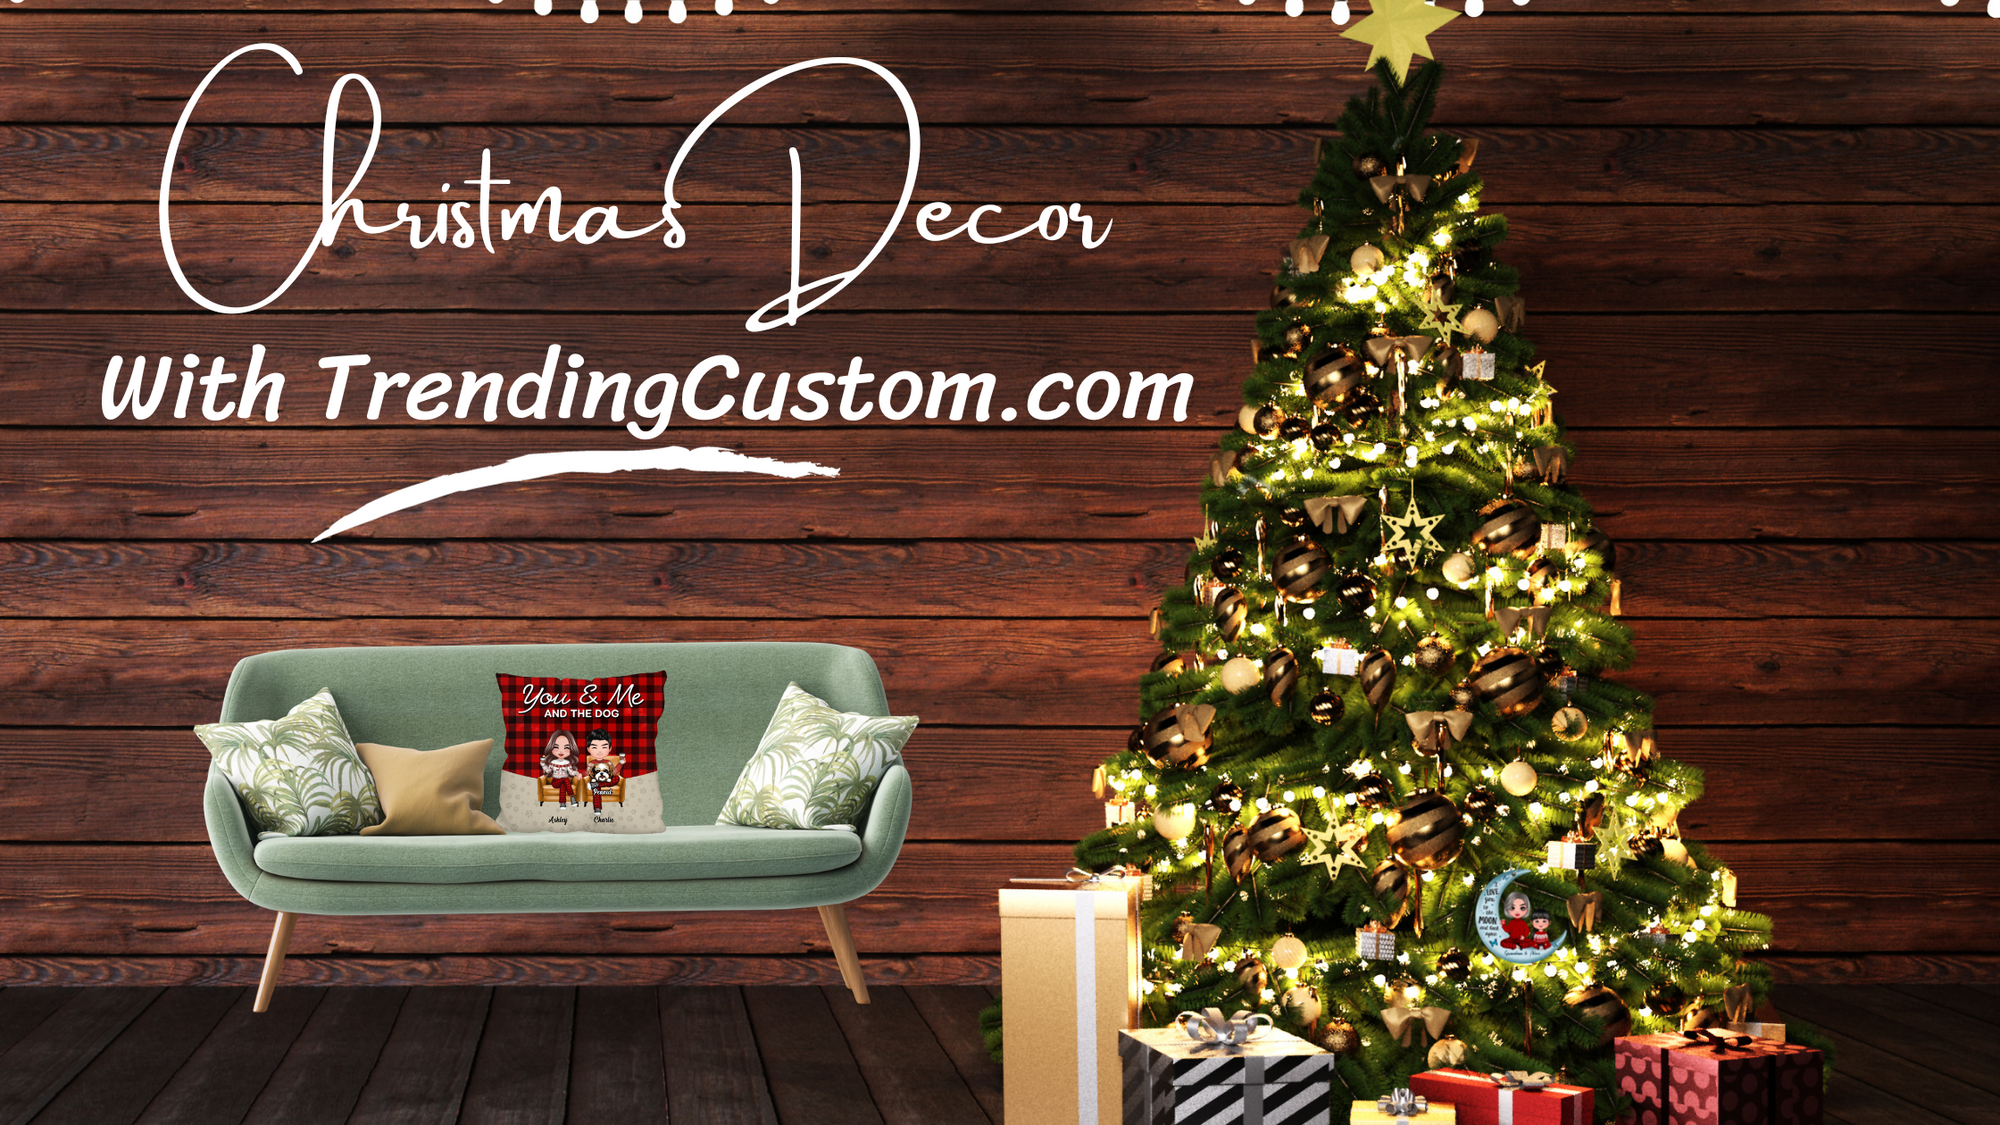 Personalized Christmas Decor: Make Your Home Merry and Bright